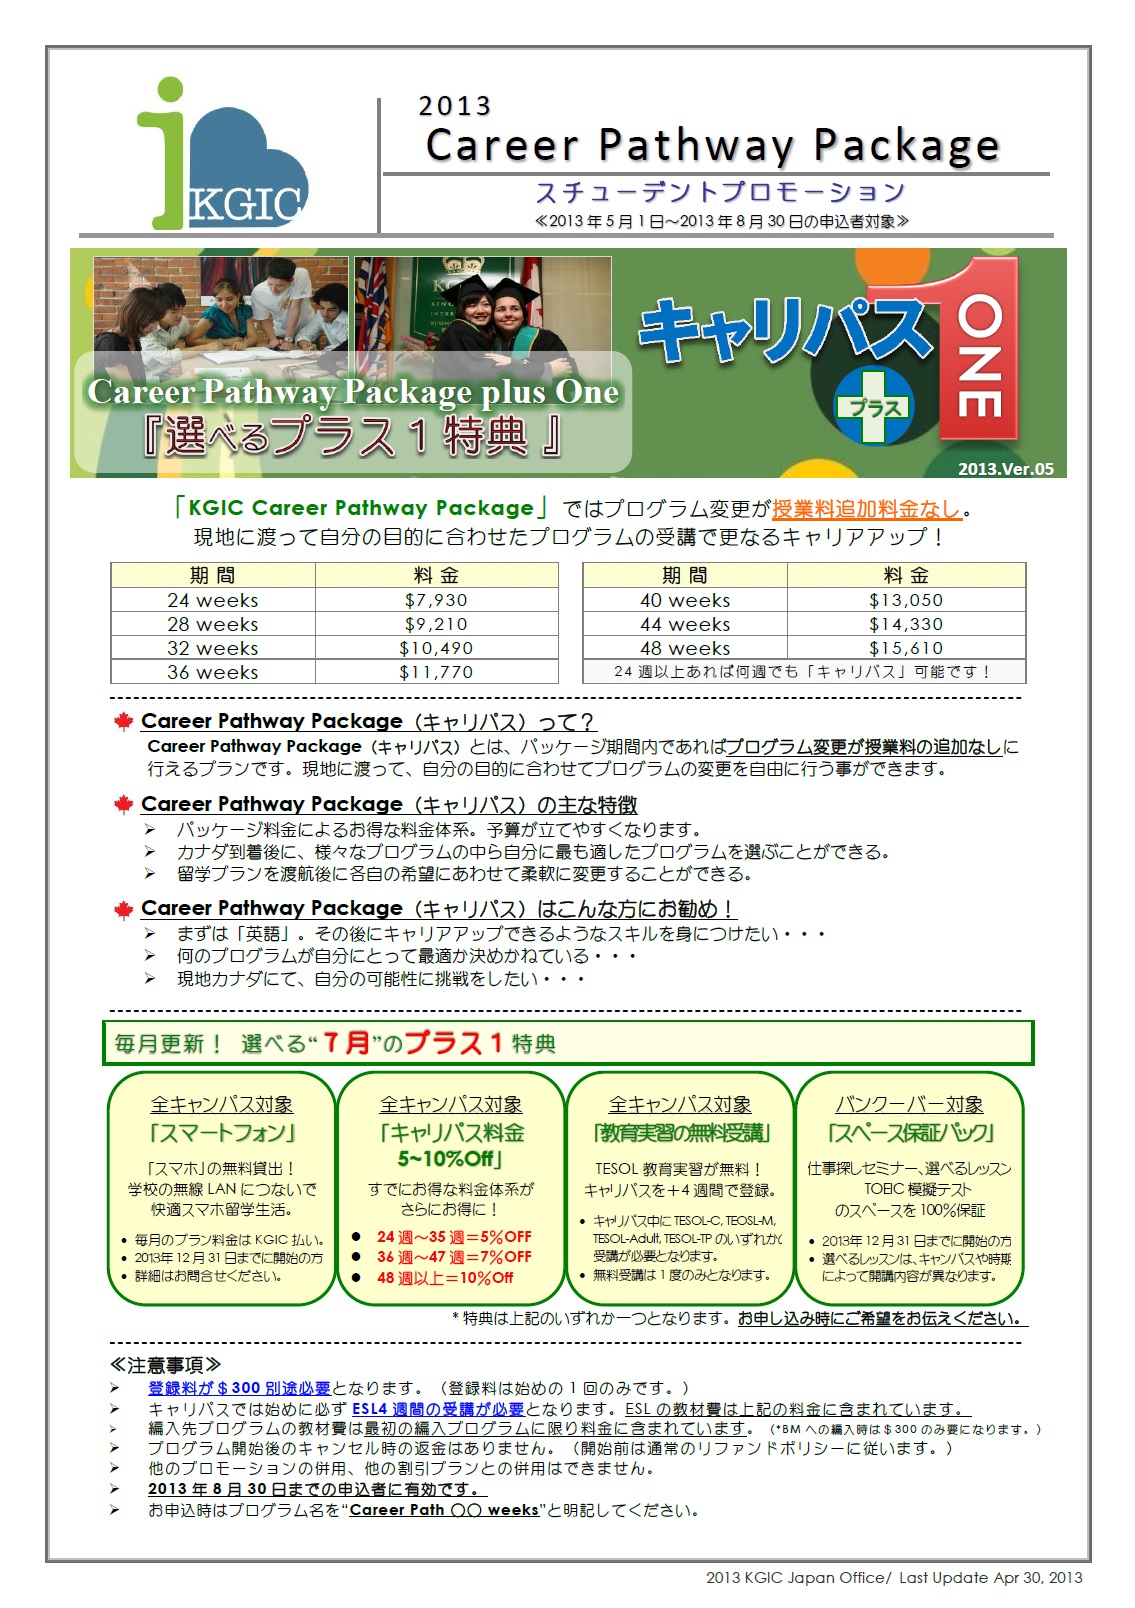 KGIC_Promotion_2013.05_08_Career_Pathway_Package__Ver.05